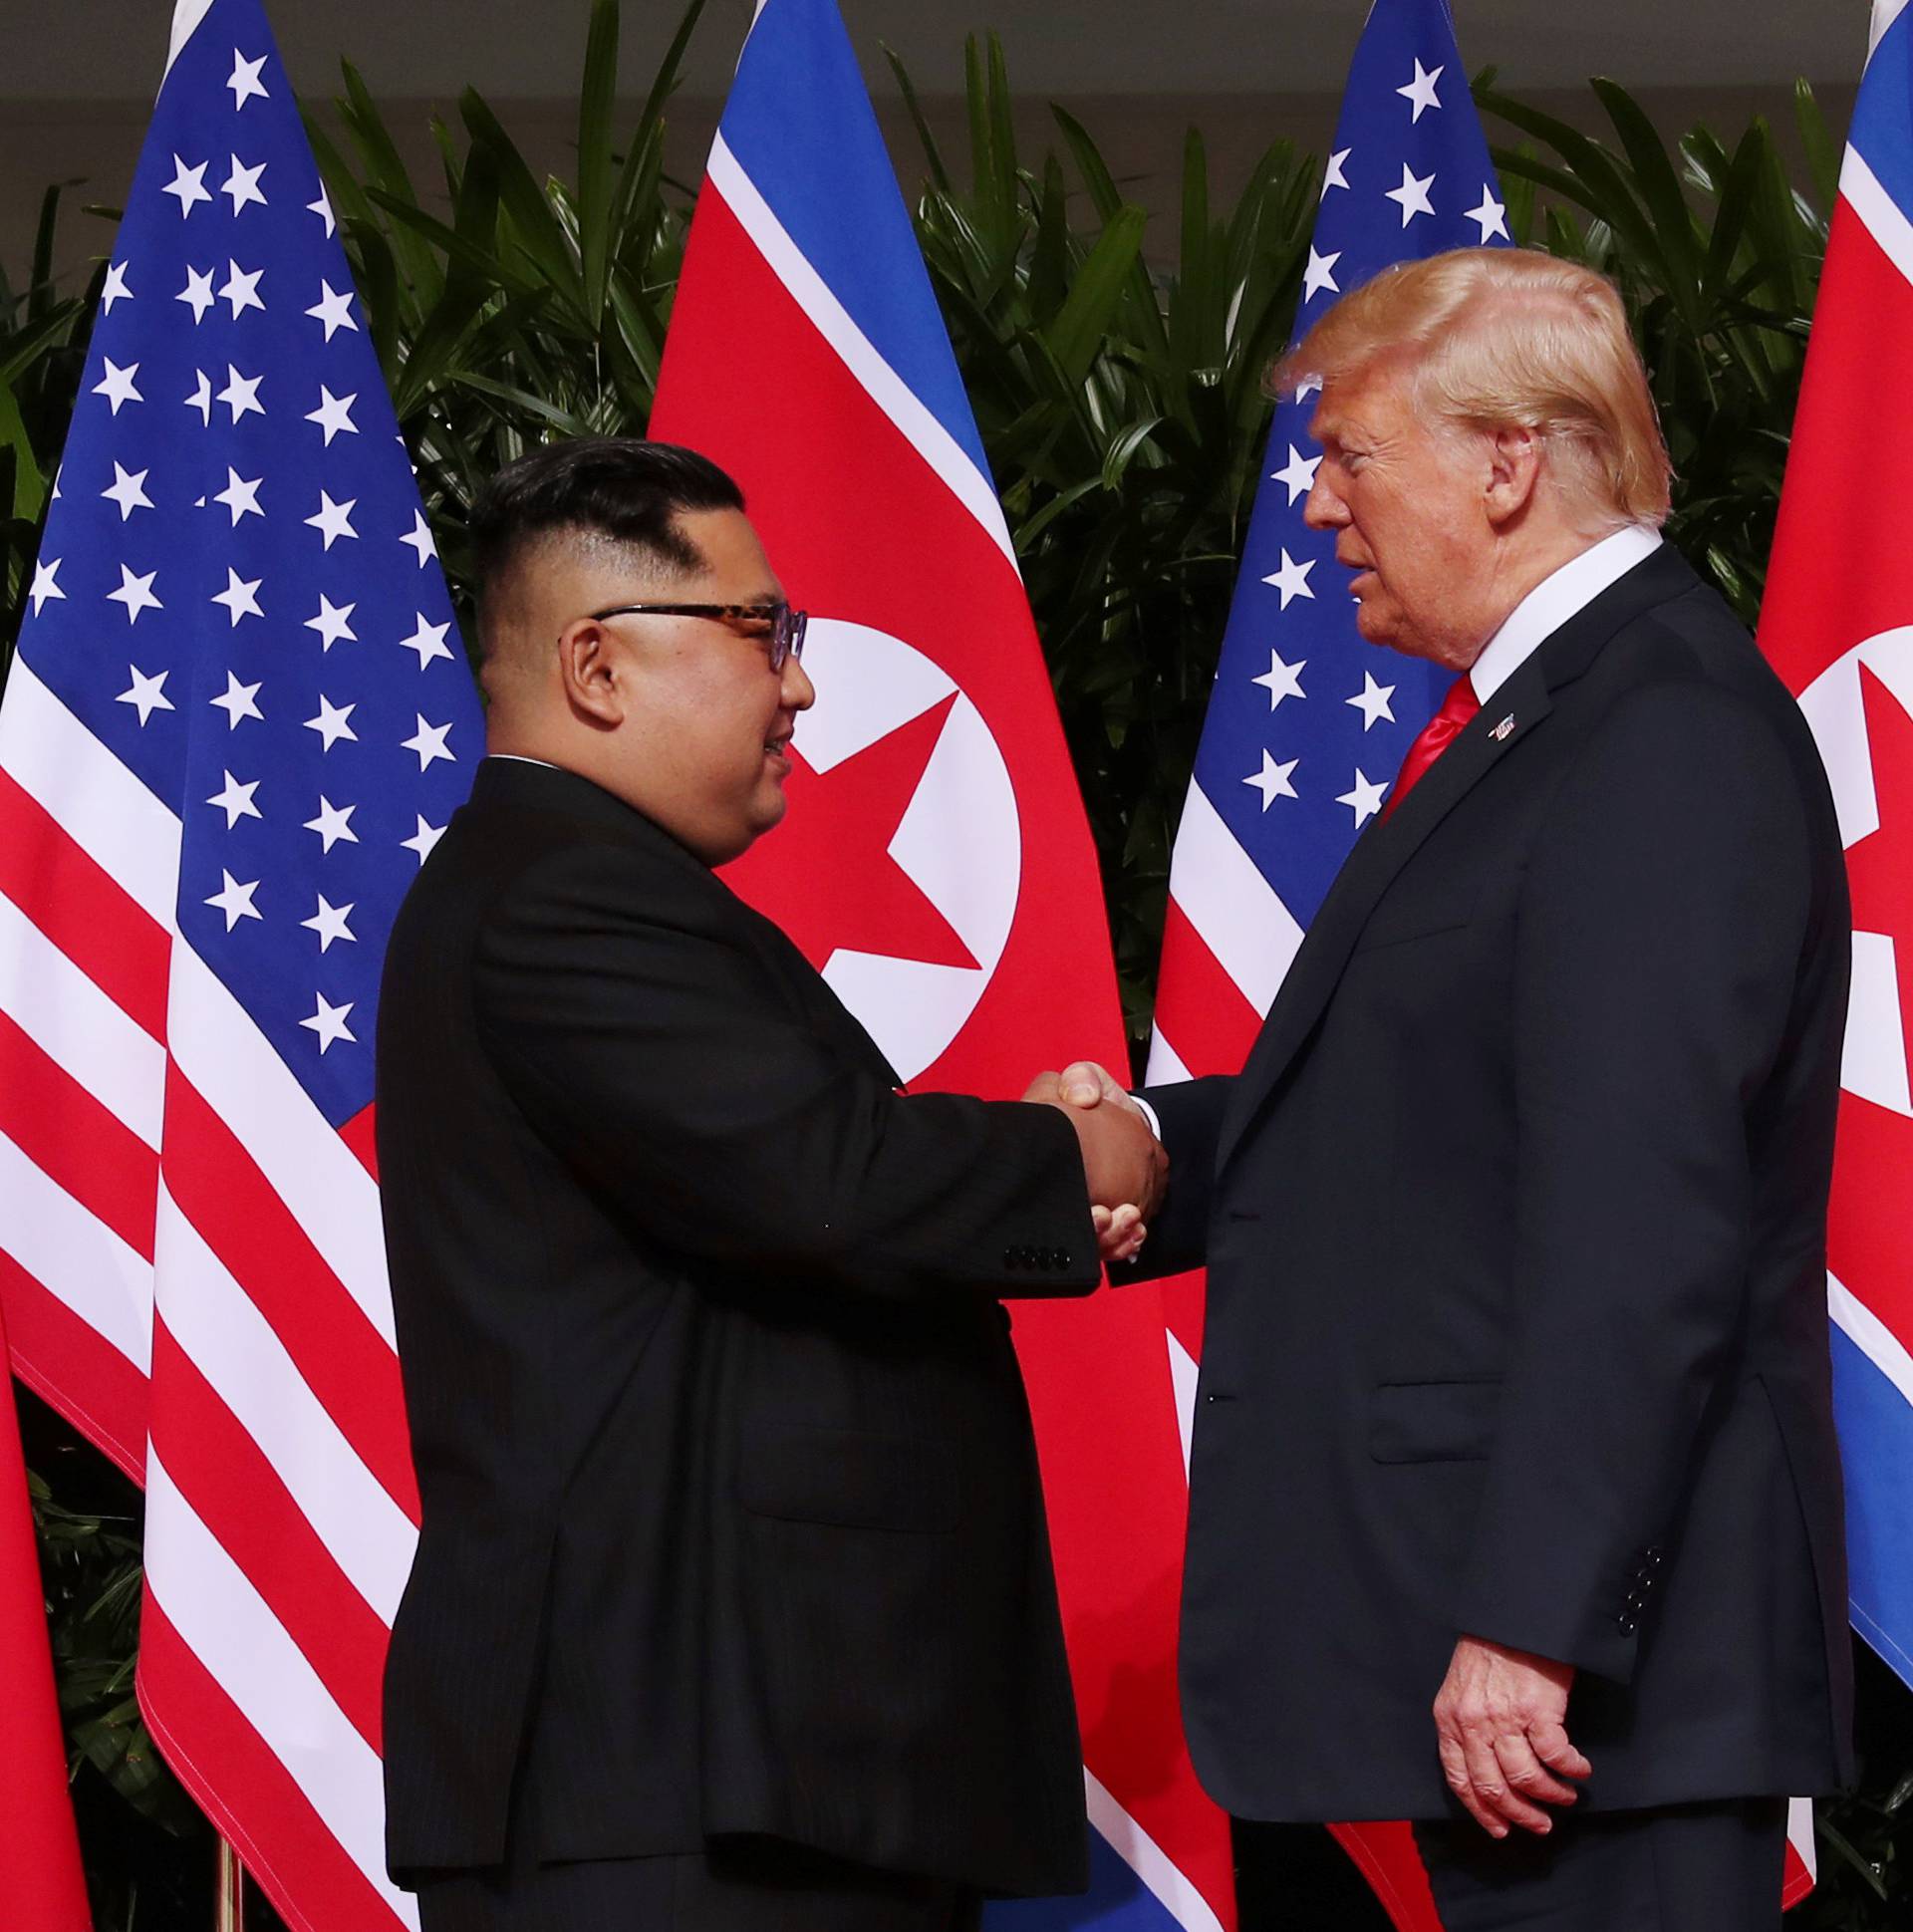 U.S. President Donald Trump shakes hands with North Korean leader Kim Jong Un at the Capella Hotel on Sentosa island in Singapore